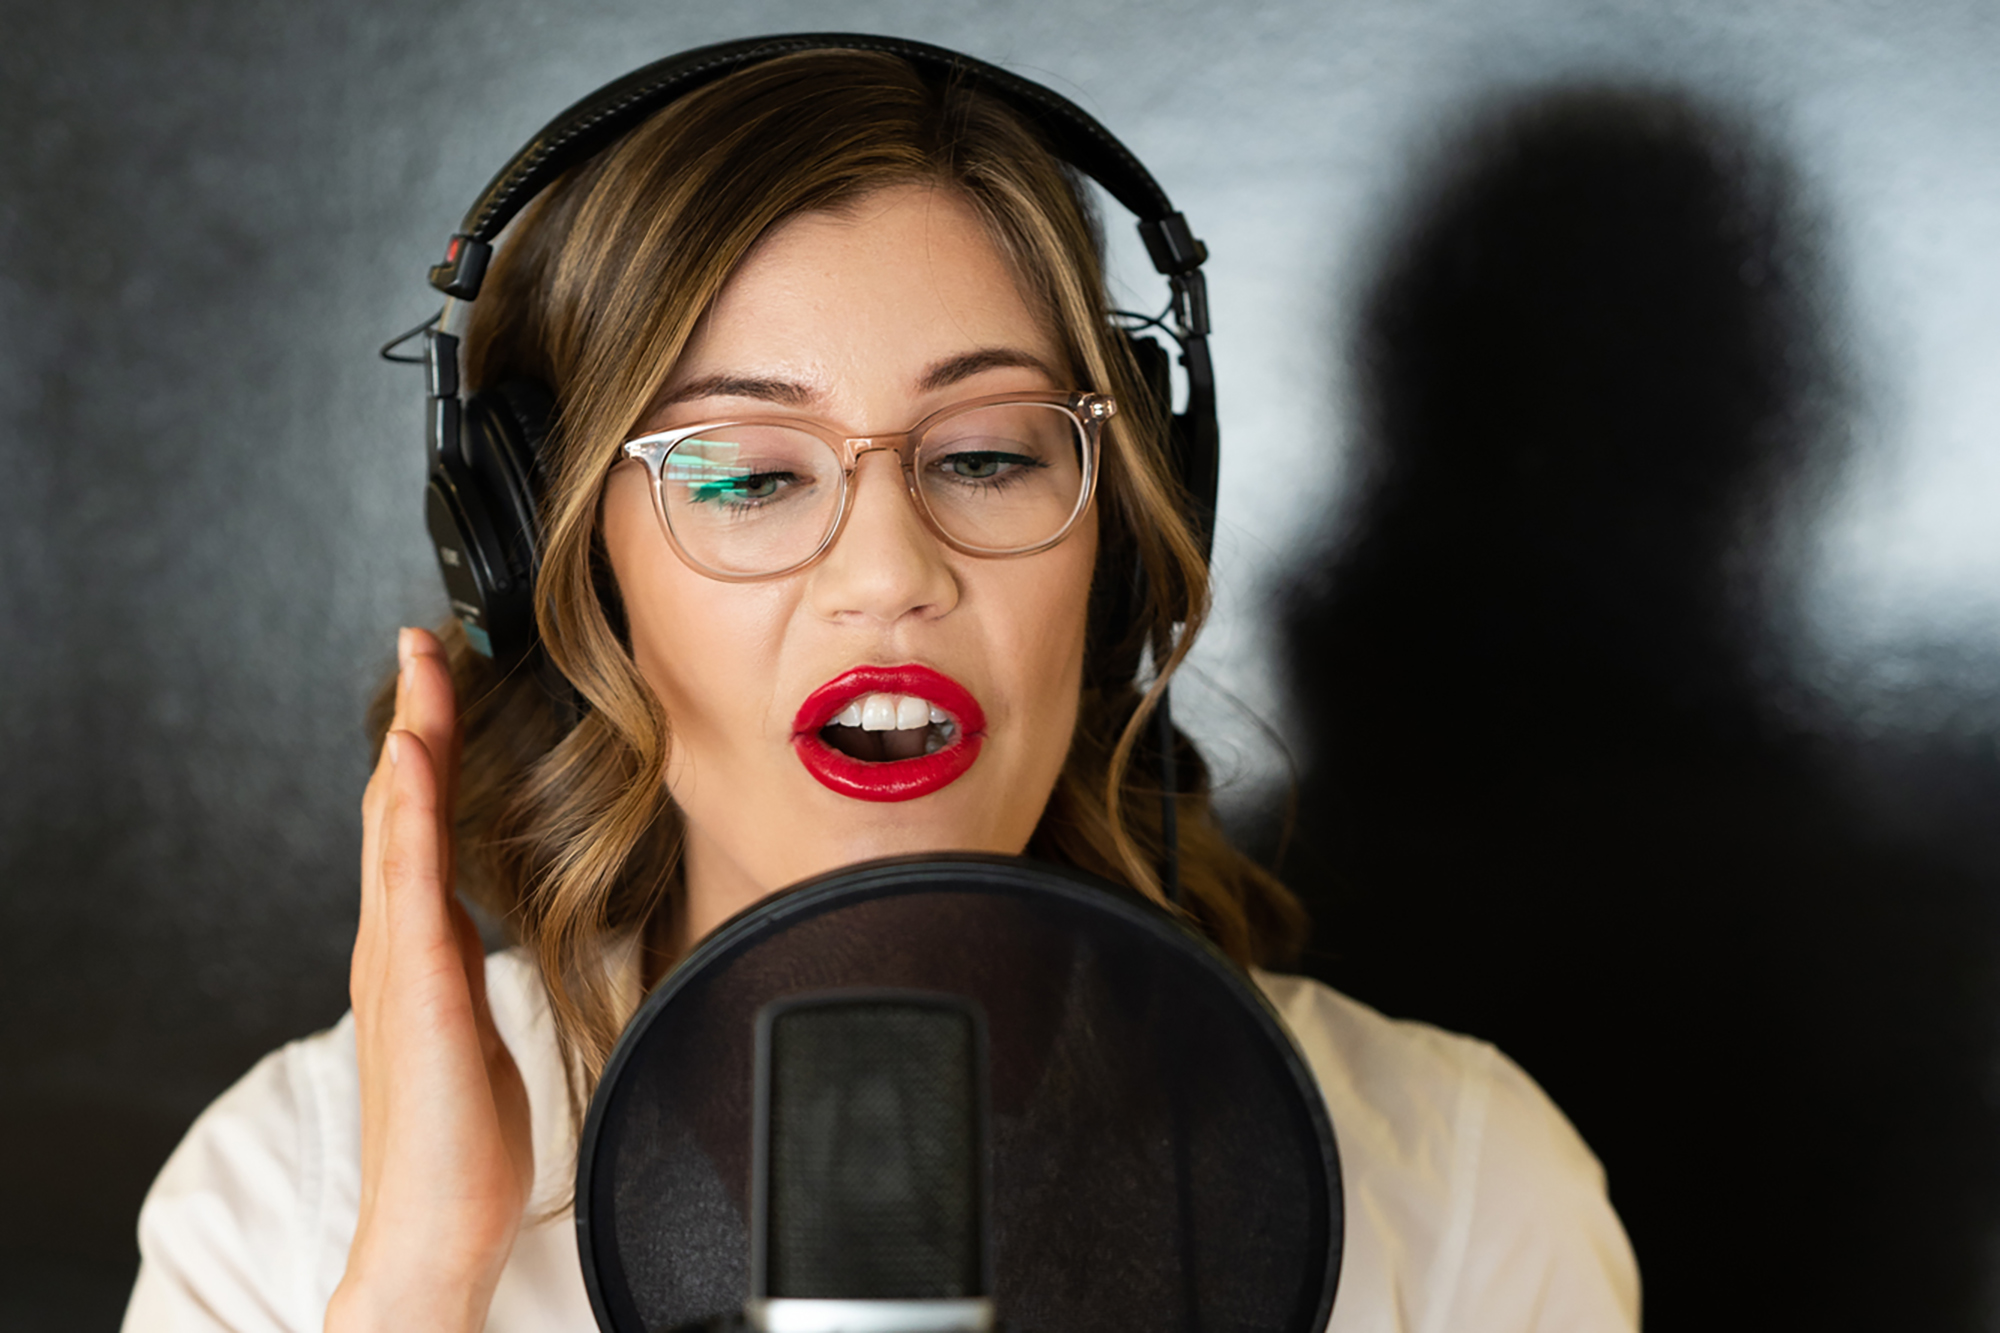 Are You A Voice Actor? Learn How To Record The Perfect Demo Reel With This Guide